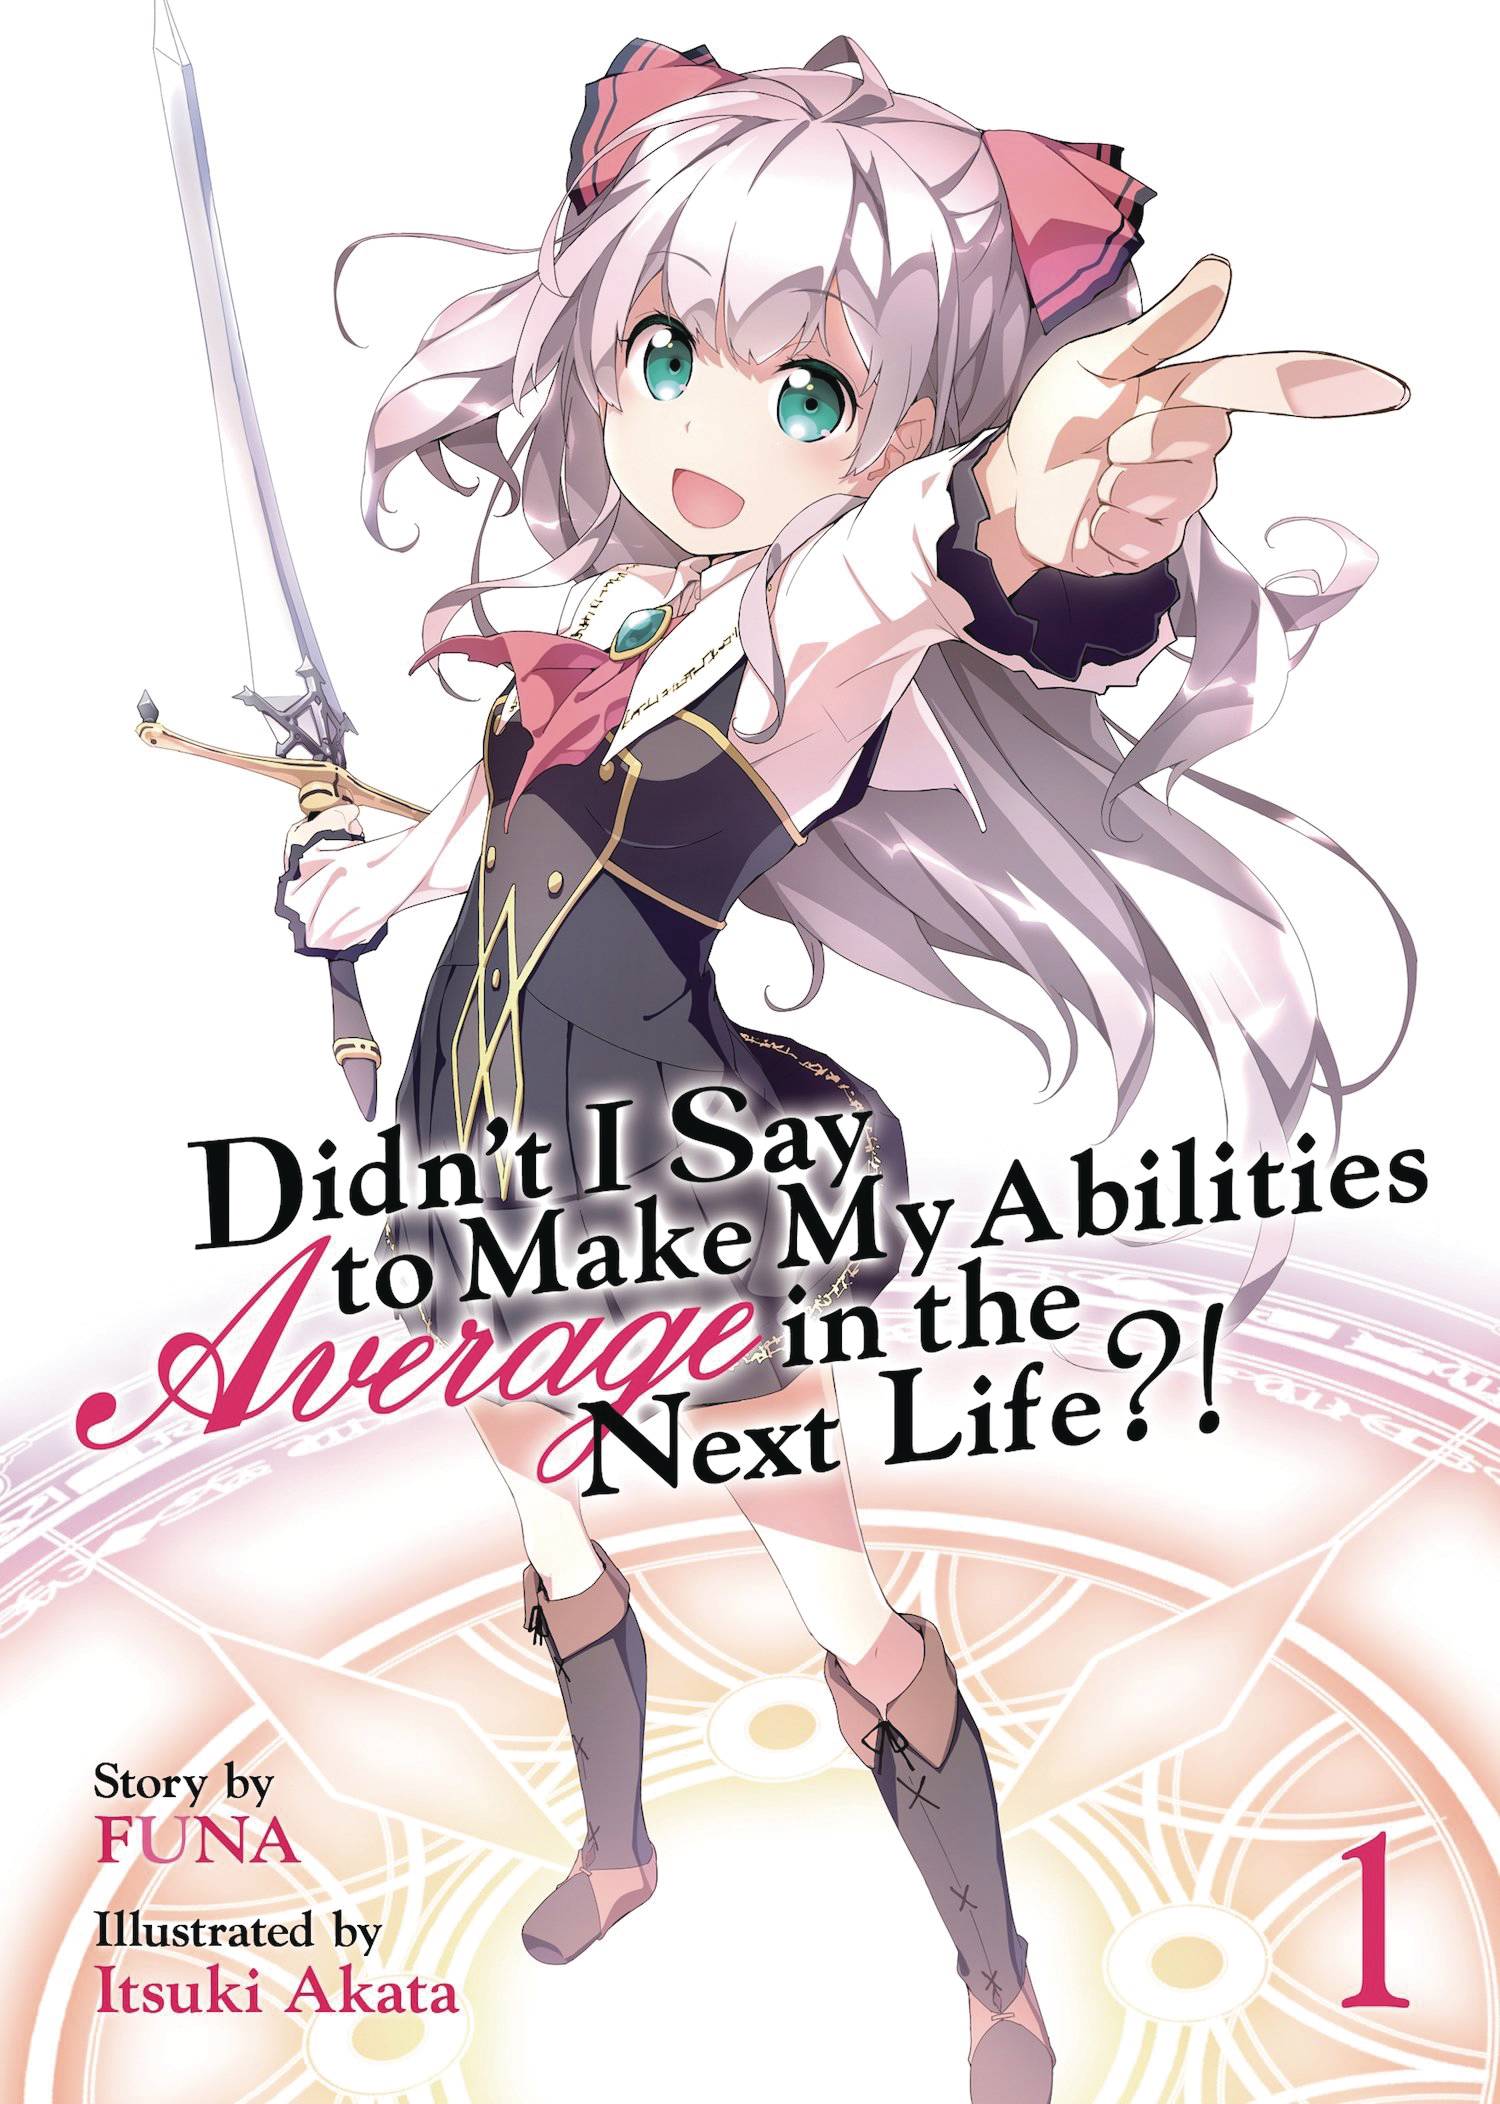 Didn't I Say to Make My Abilities Average in the Next Life?! Light Novel Volume 1 (Mature)